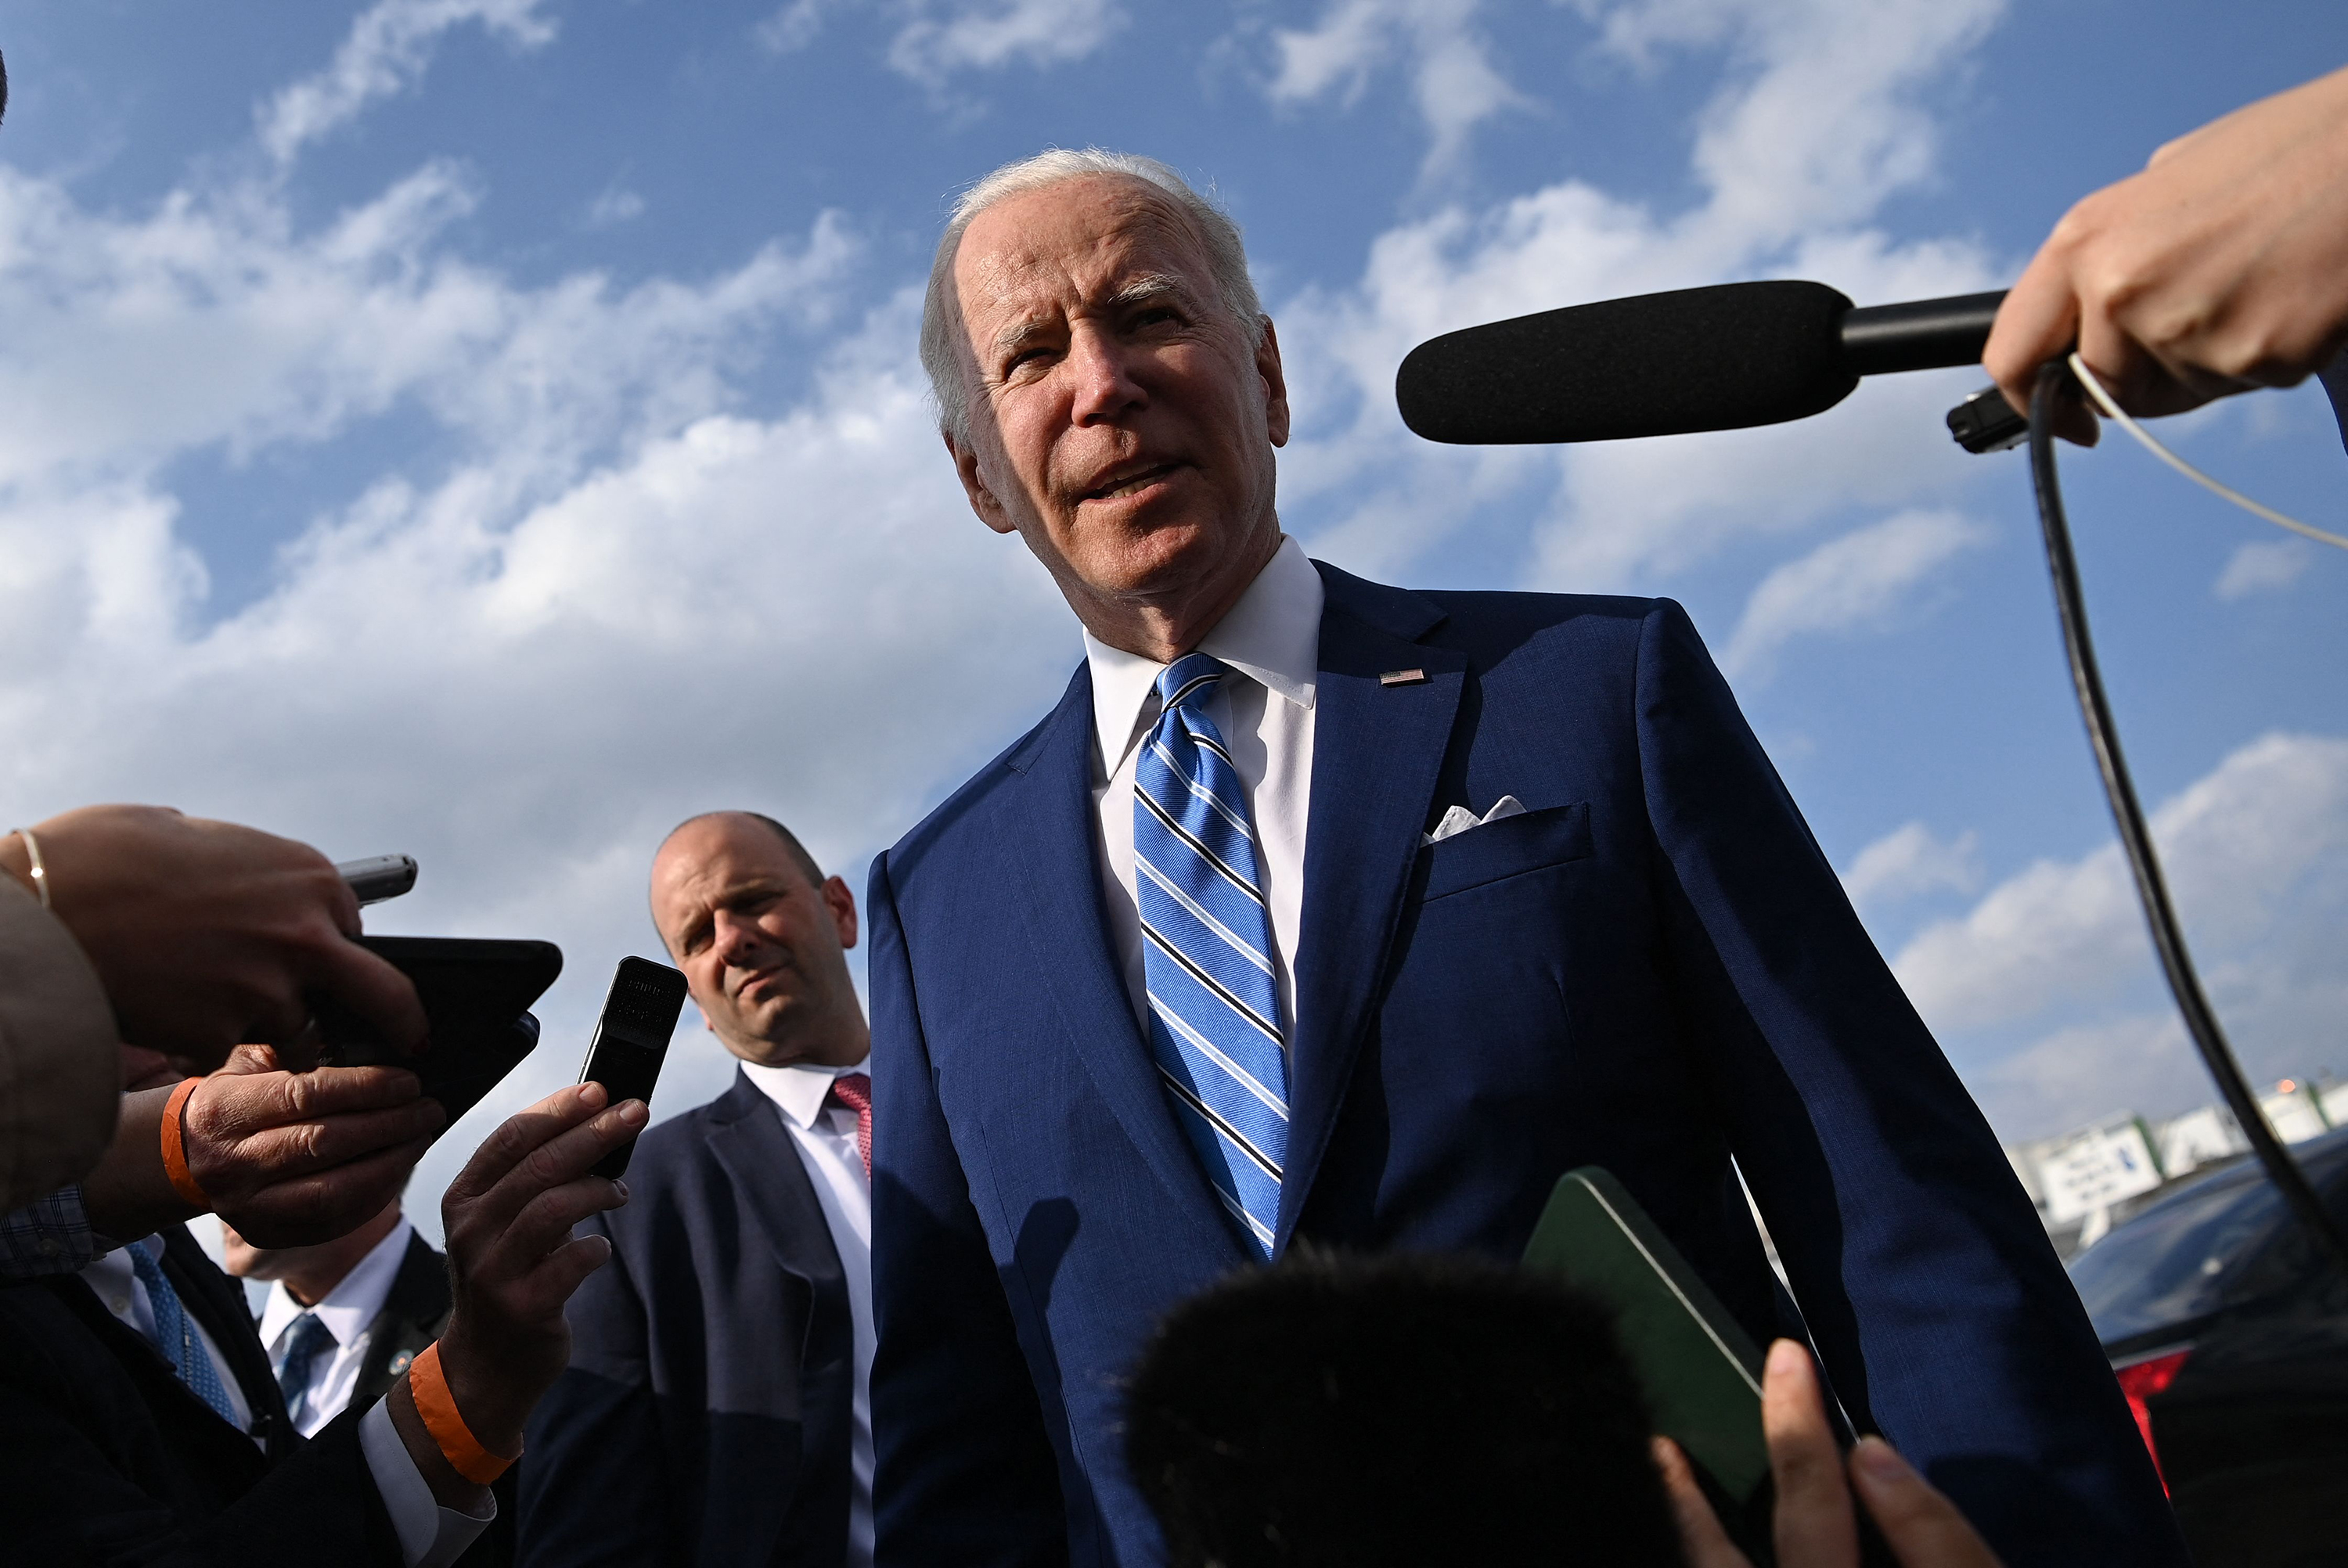 President Joe Biden speaks to the media before boarding Air Force One at Des Moines International Airport, in Des Moines, Iowa, on Tuesday, April 12, 2022.